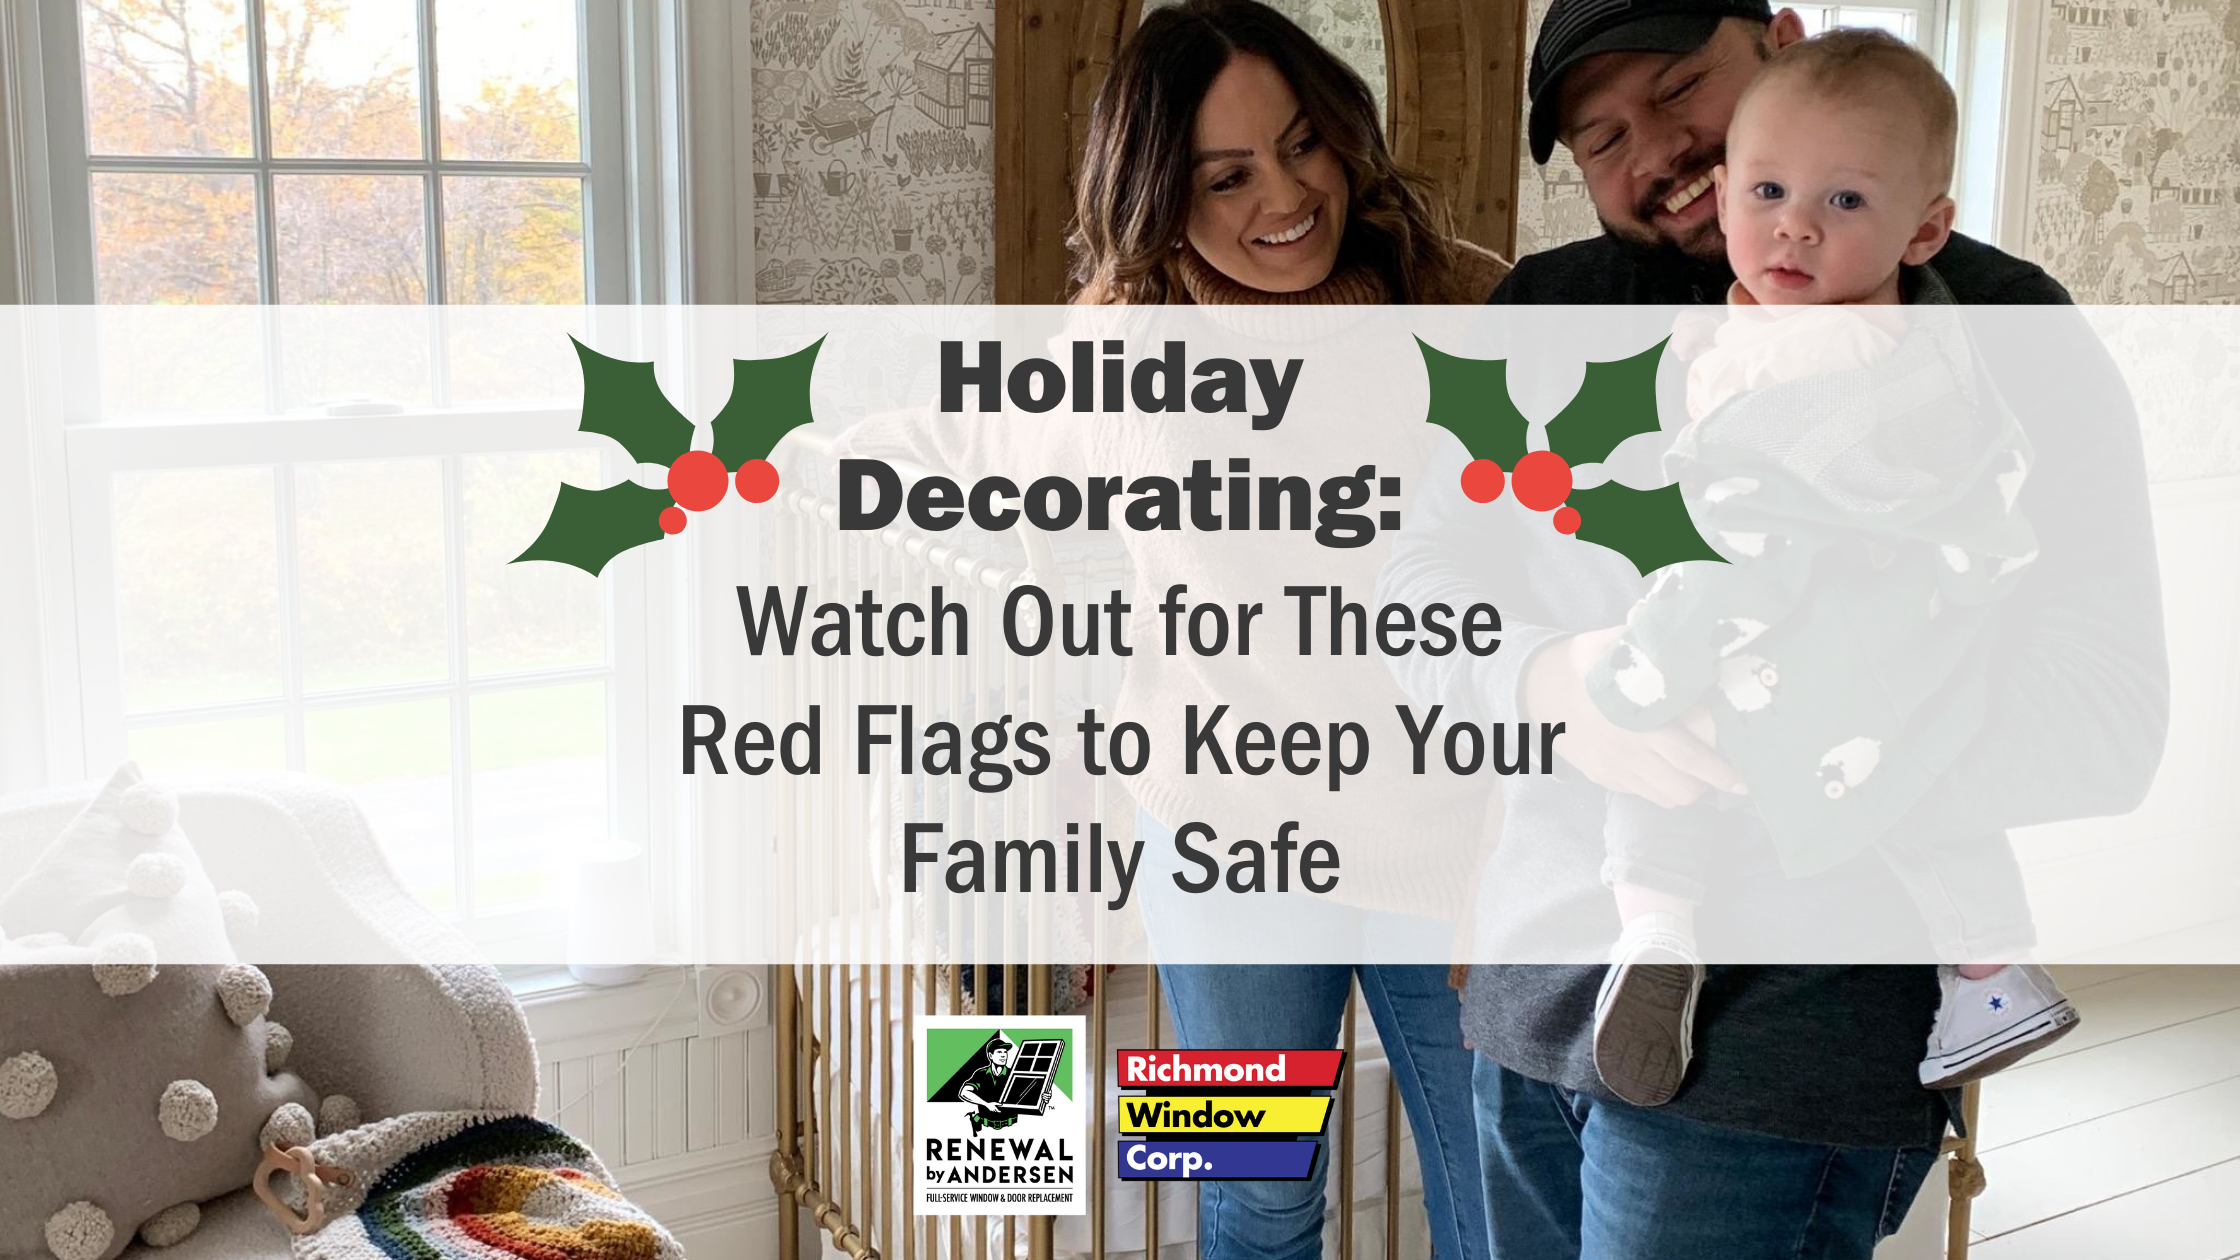 Central Virginia homeowners should watch out for these 'Red Flags' while decorating for the holidays to make sure your family is safe!